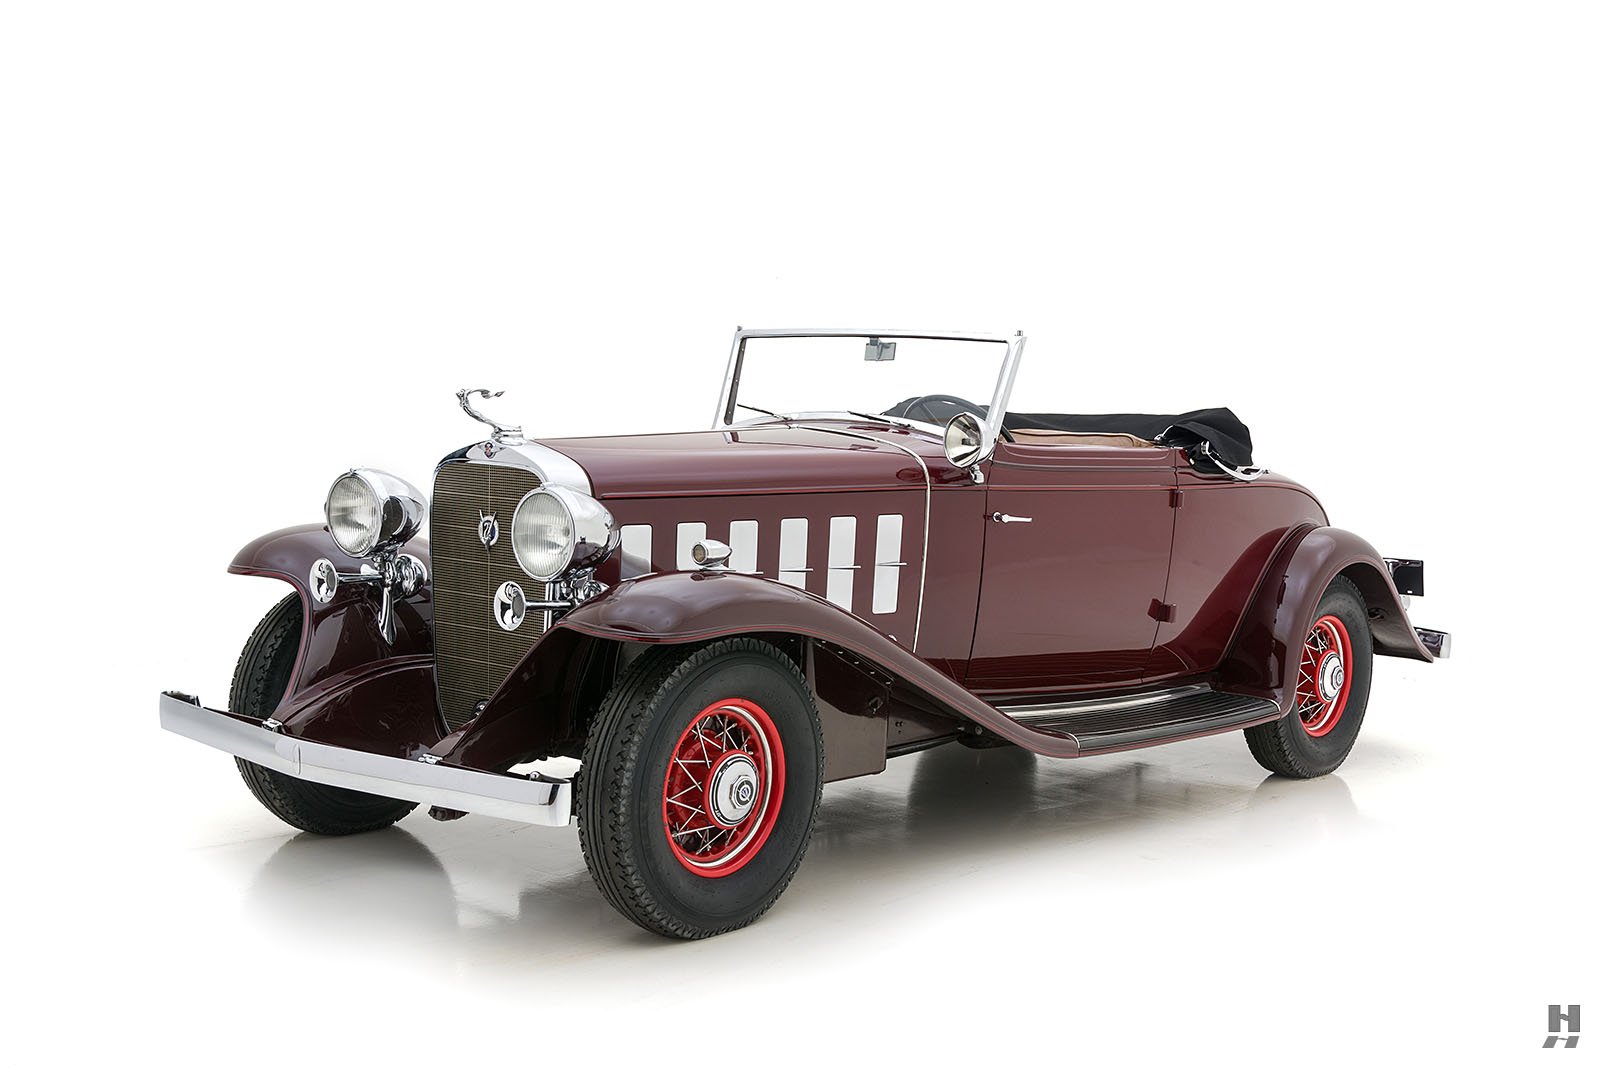 1932 Cadillac V12 For Sale | Vintage Driving Machines